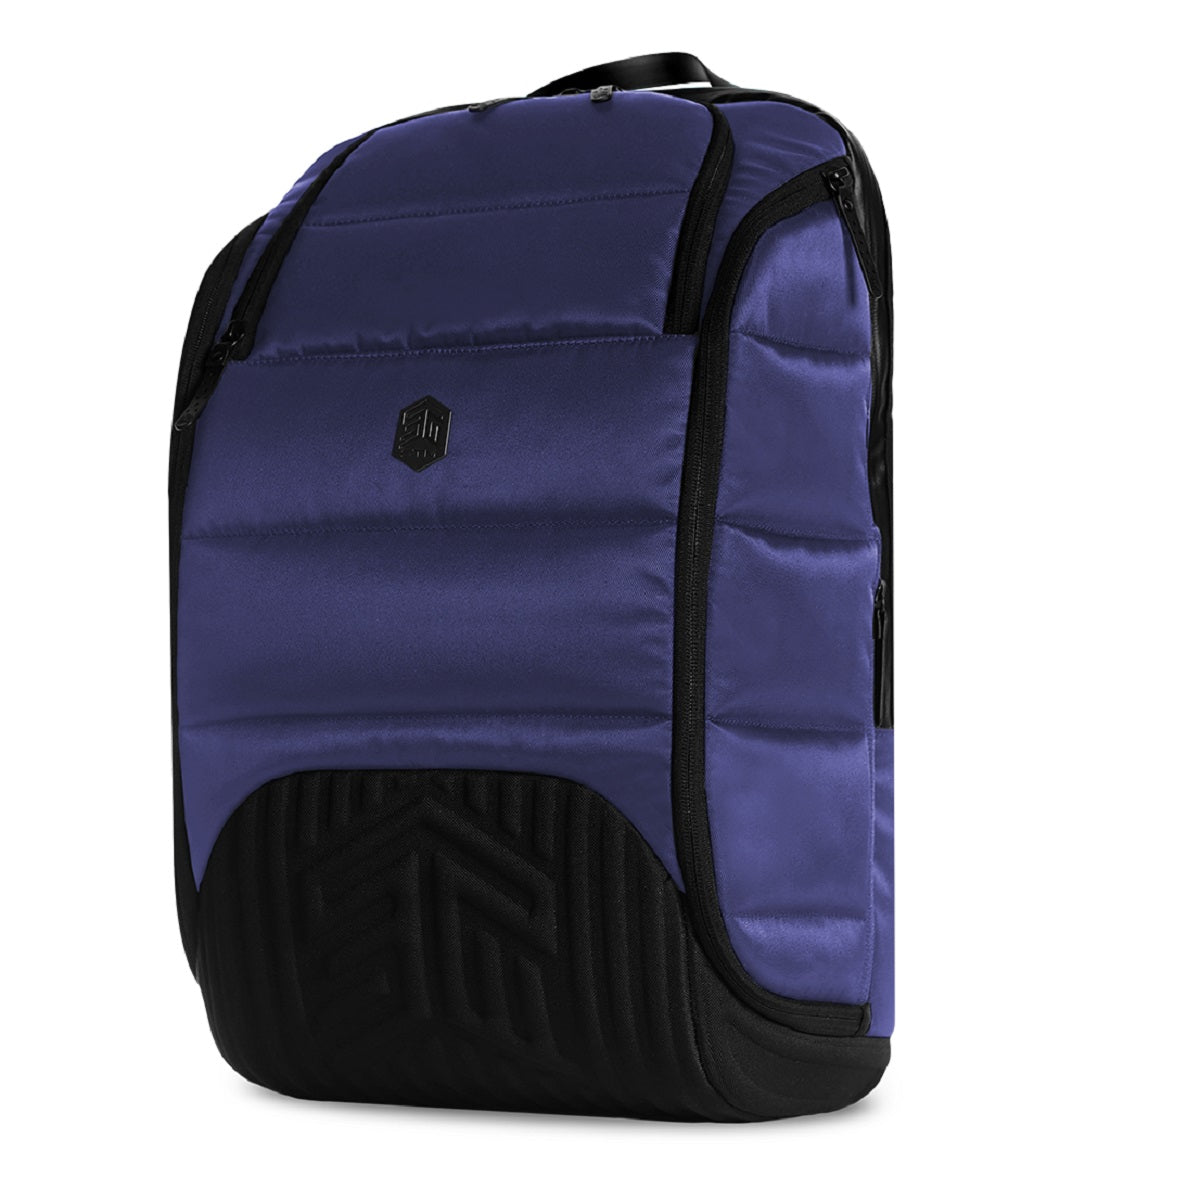 STM-Dux-BackPack-Blue-sea-Front-Left_5ffbb573-fdc5-41fa-82f1-f5d9090996a4.jpg